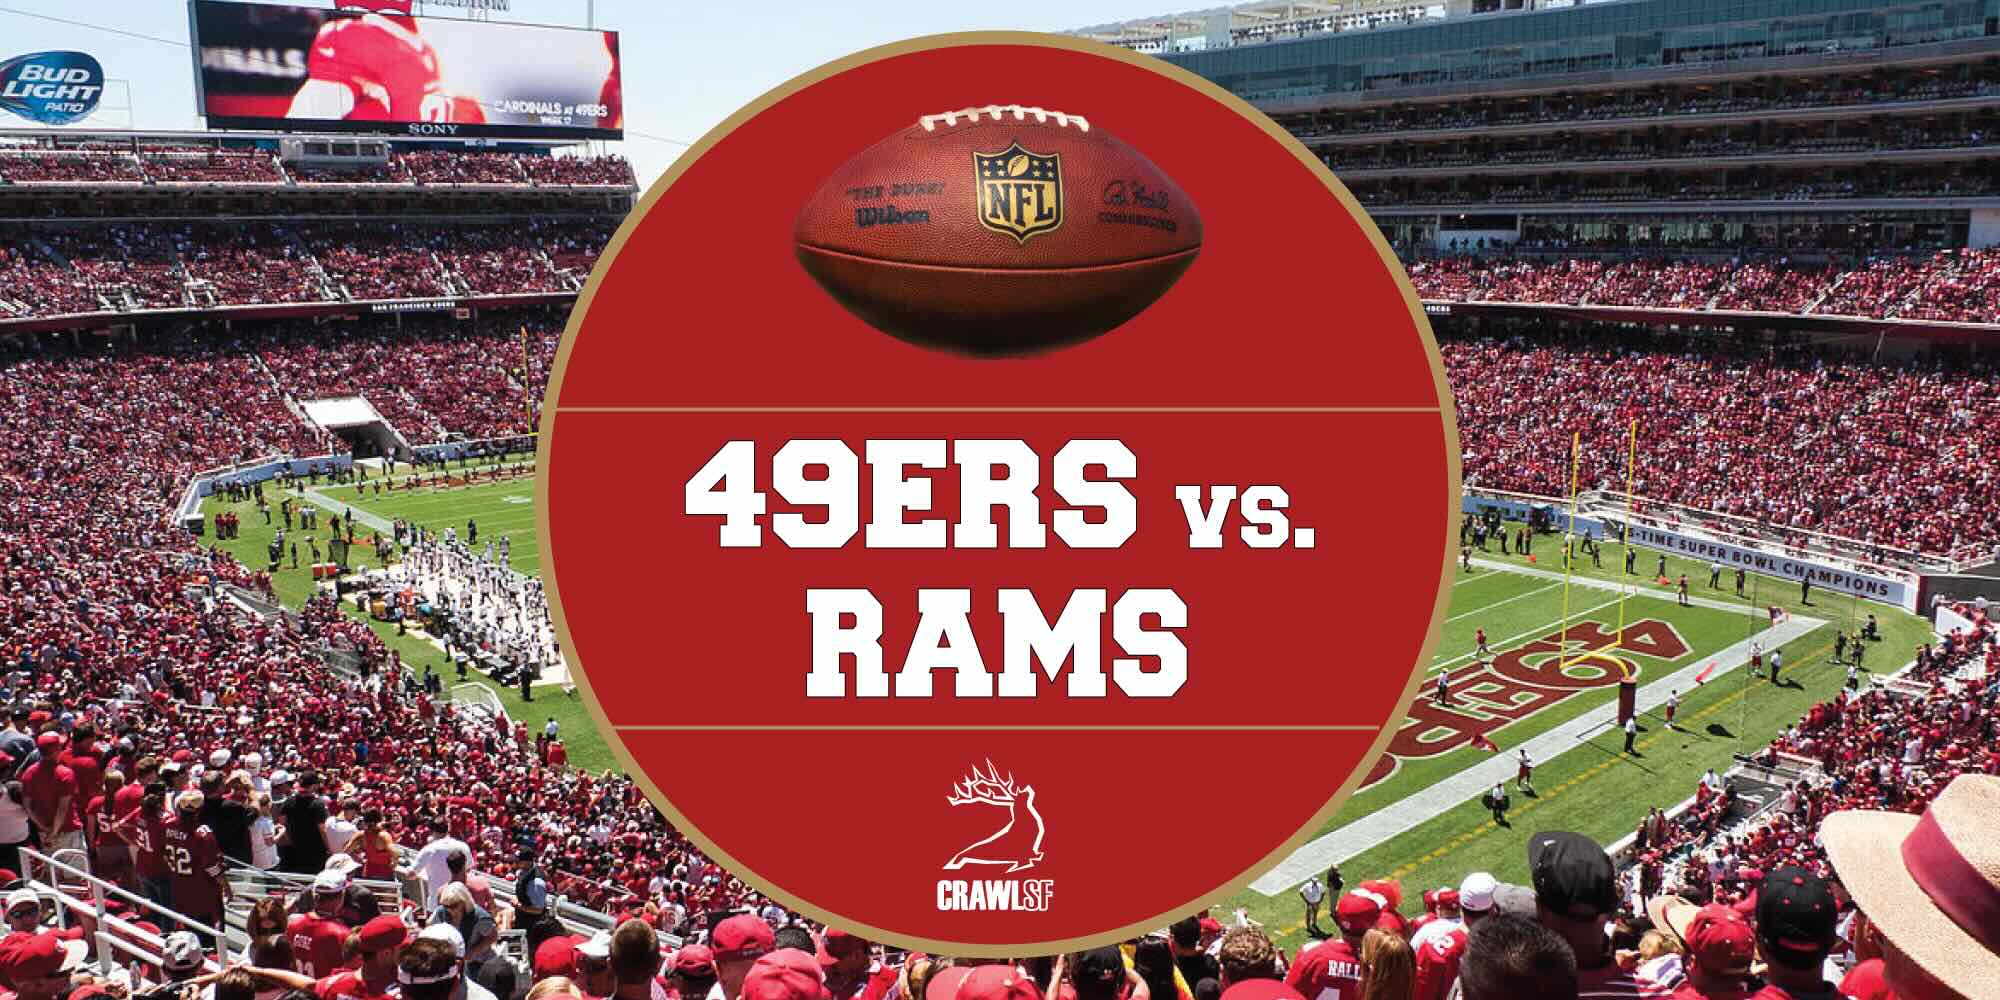 rams niners playoff tickets